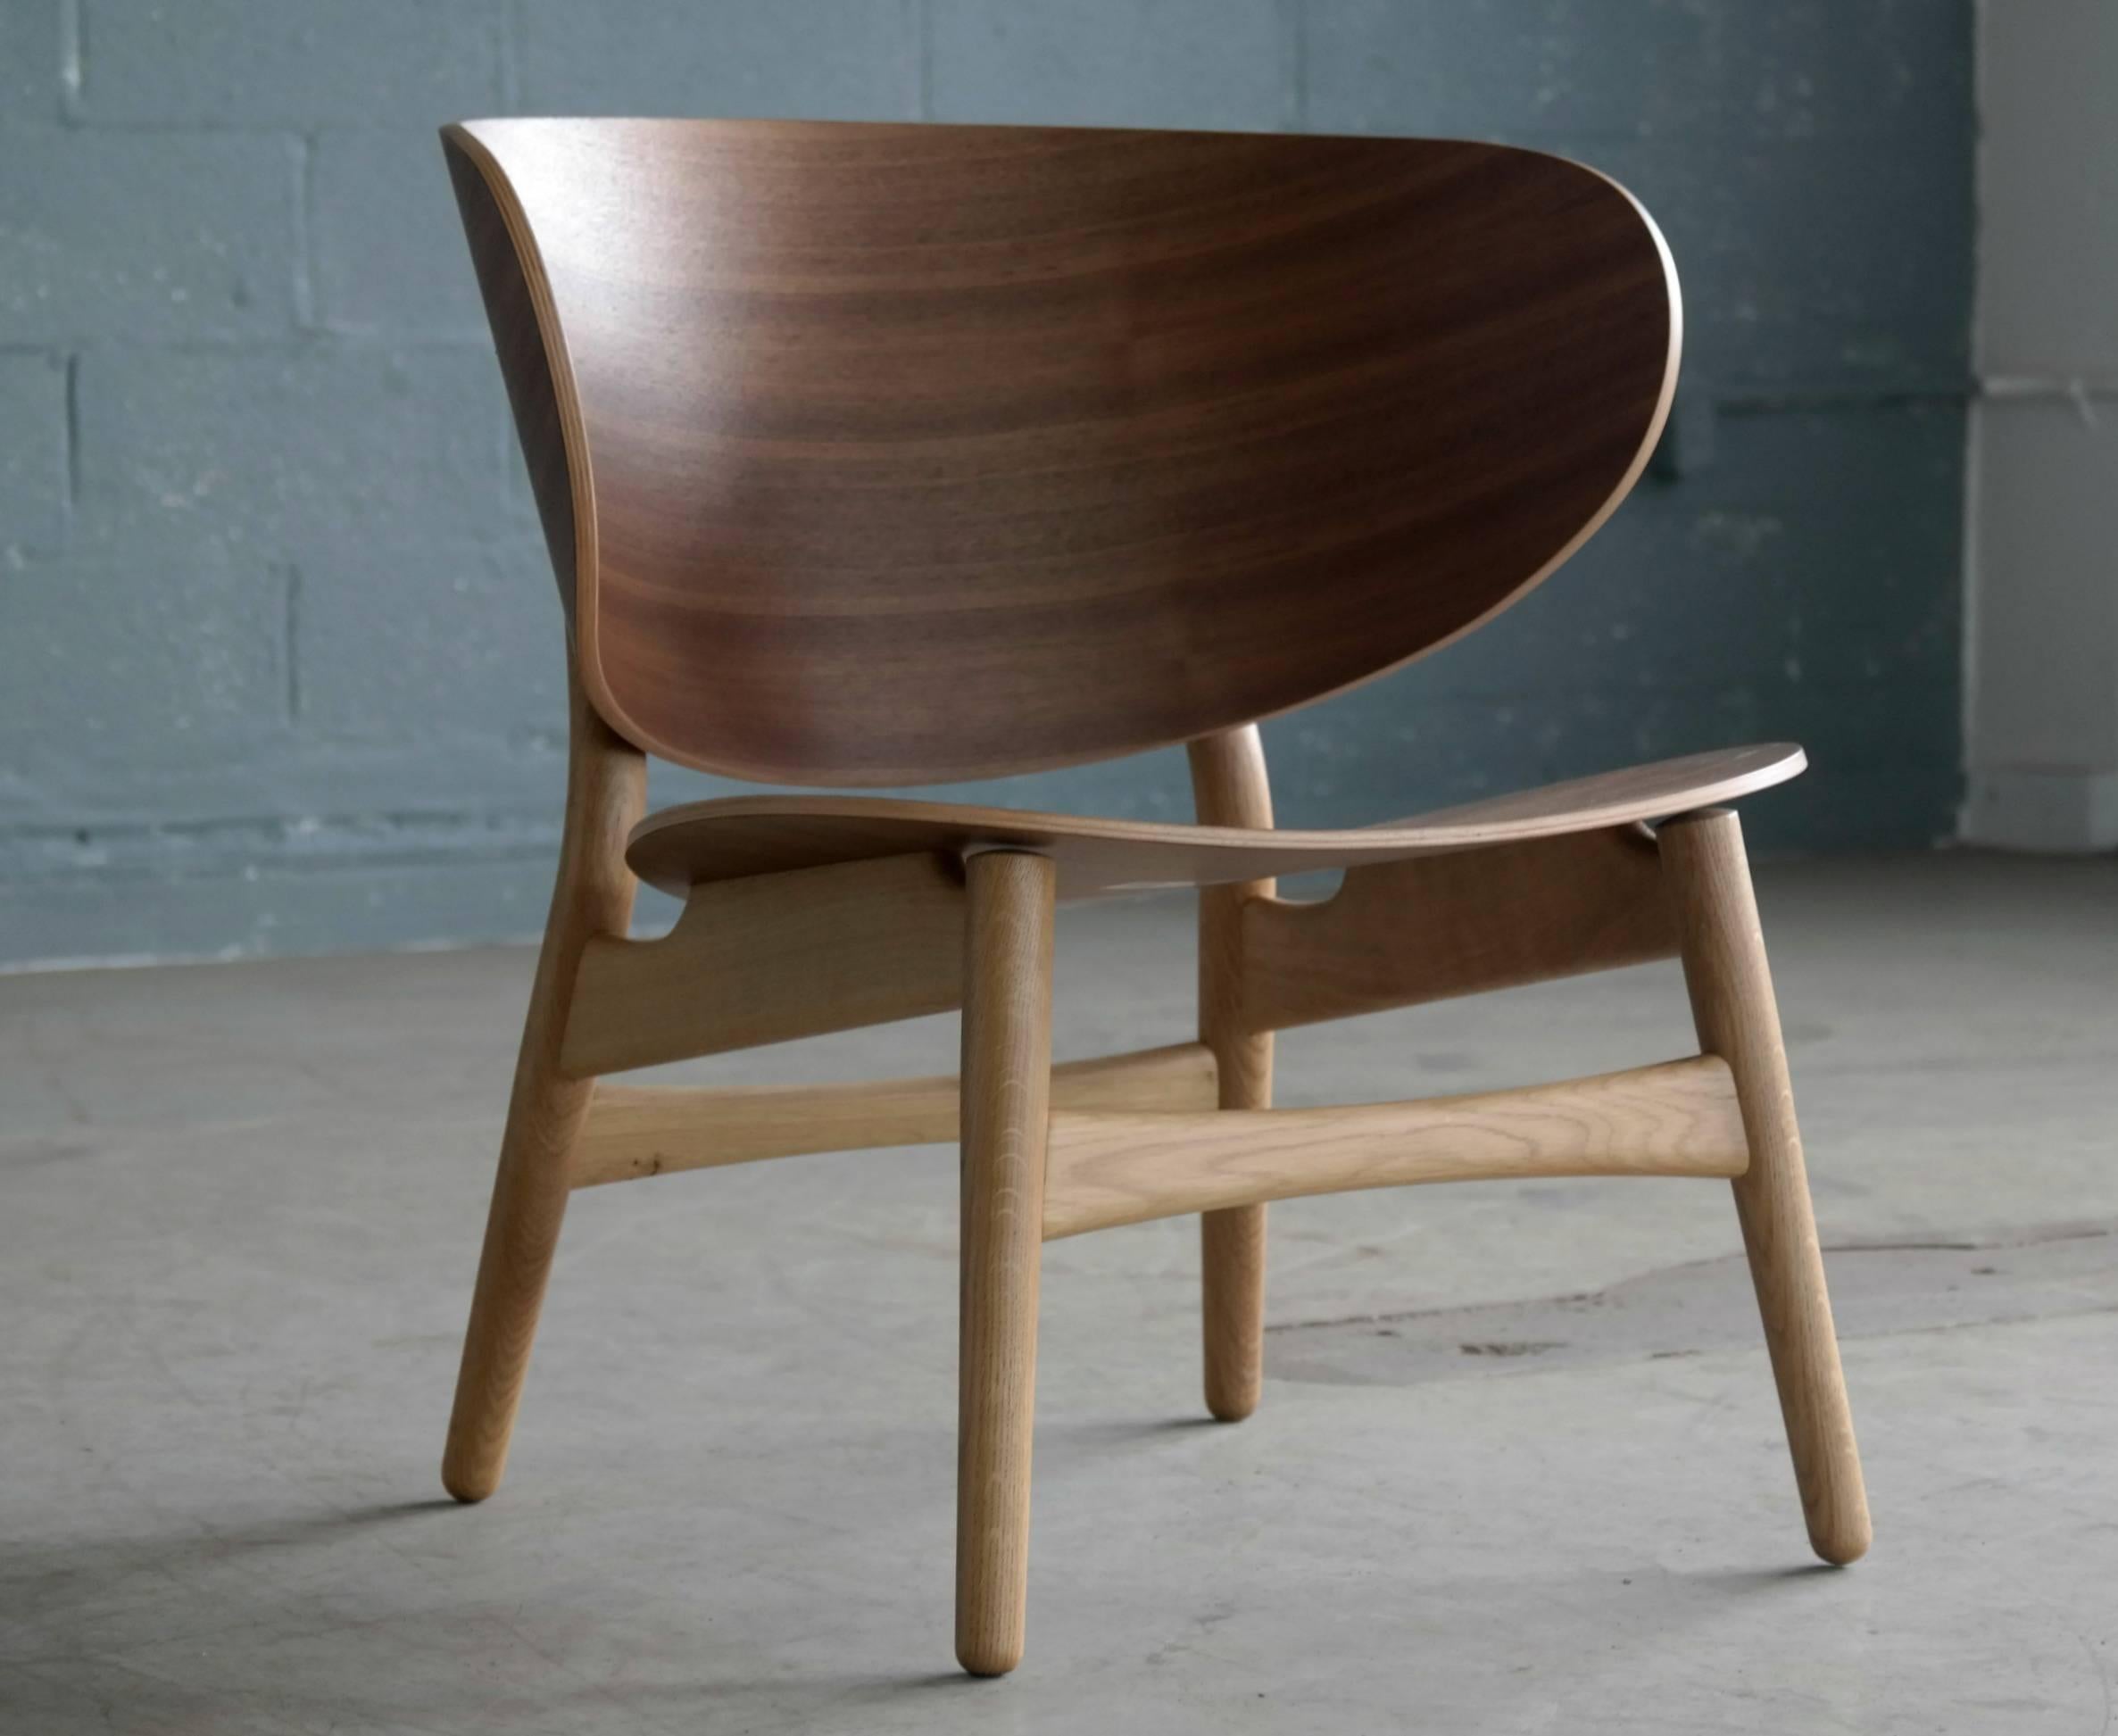 This fantastic shell chair with backrest and seat in walnut veneer on a base of soap treated oak is a 2015 re-issue by GETAMA of the classic chair designed by Hans Wegner in 1948. While the original design had teak in the seat and back the use of